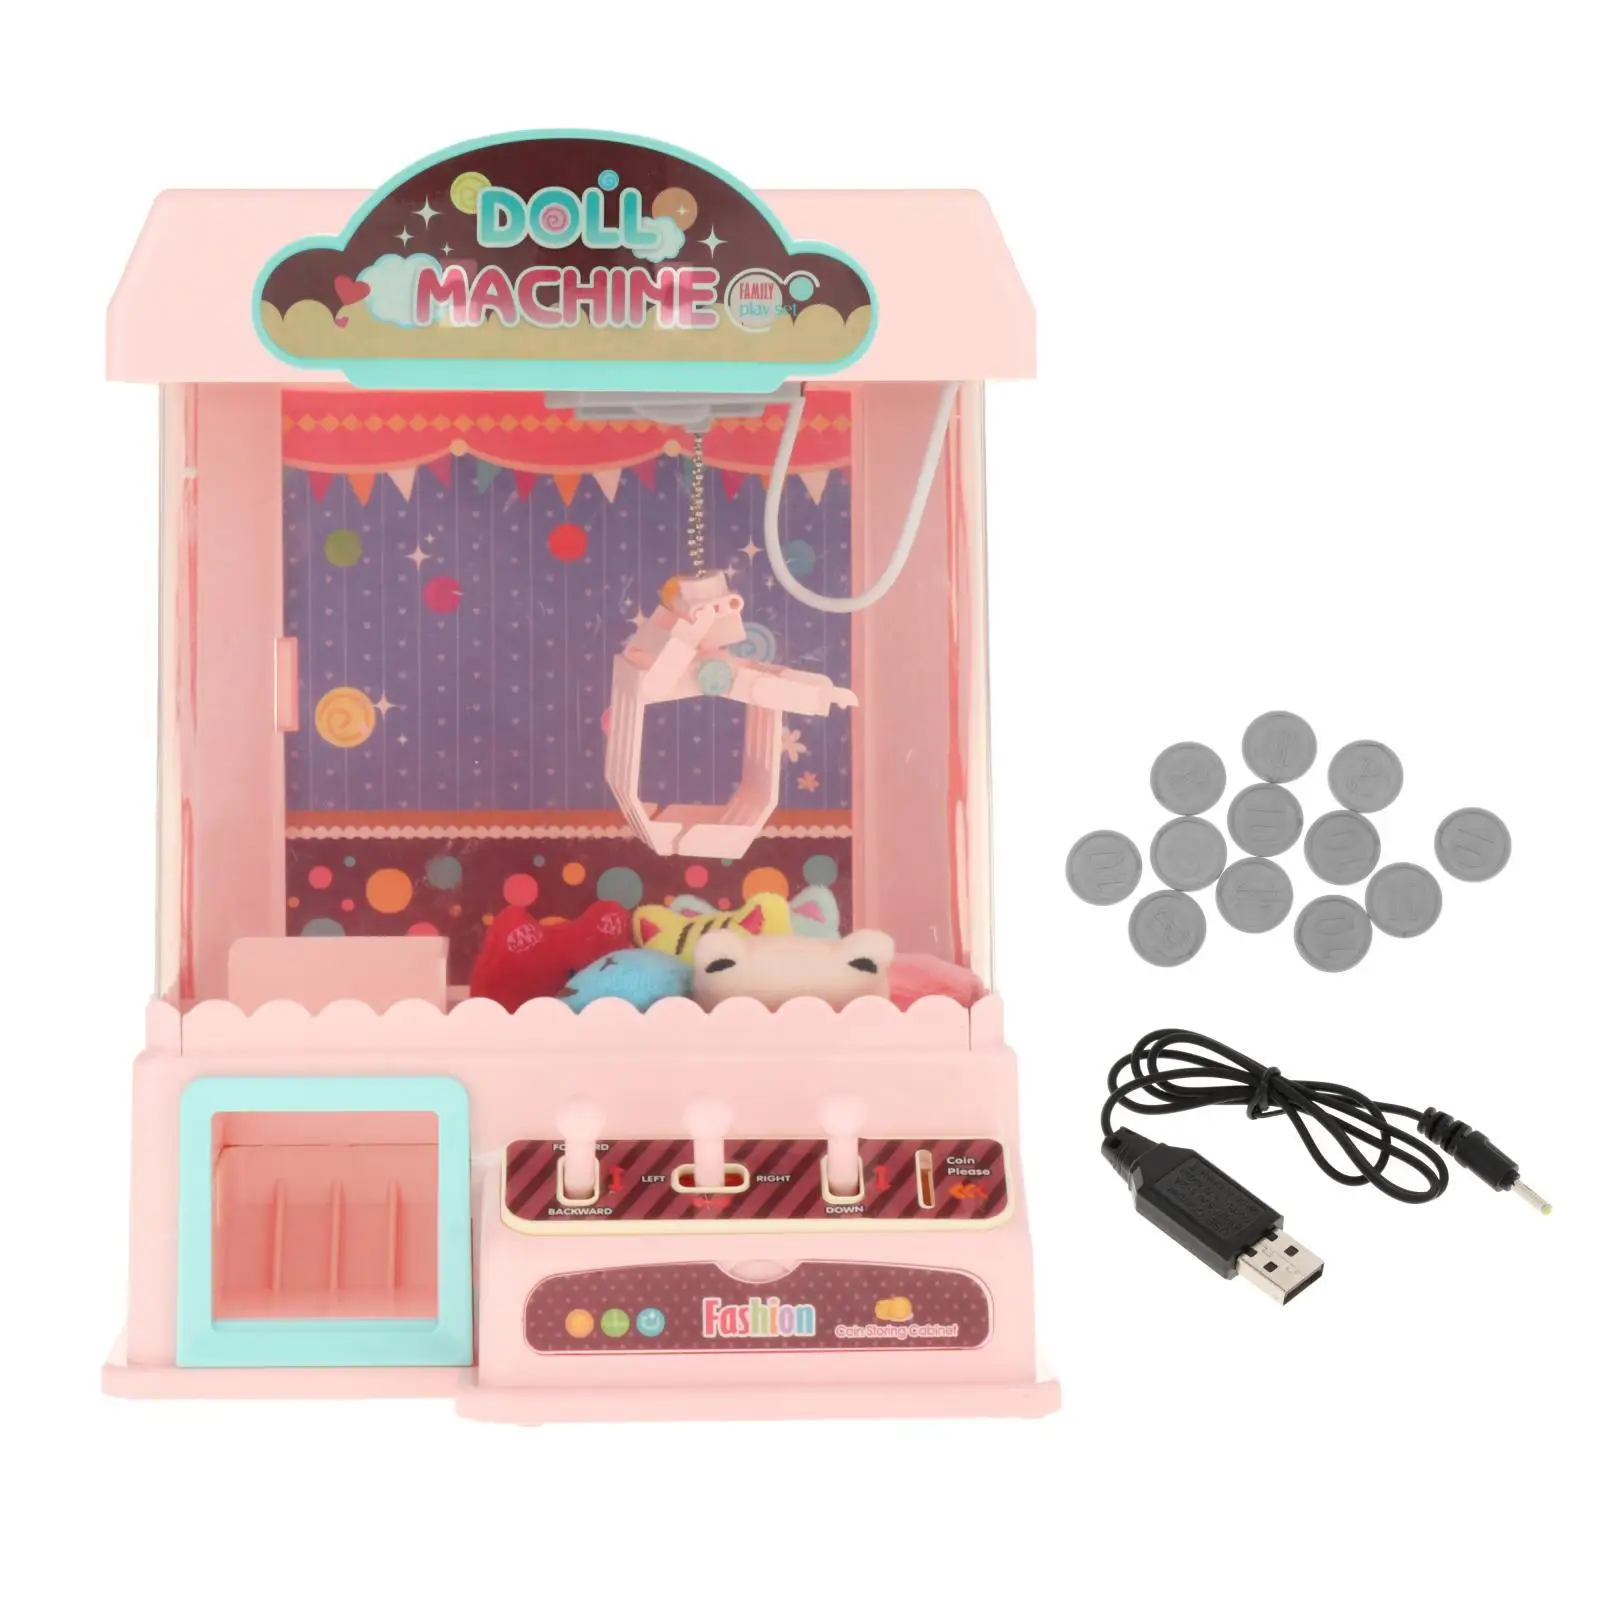 Rechargeable Electronic Claw Game with Lights & Sounds Girl Grab Doll Clip Arcade Machine for Children Kids Birthday Gifts